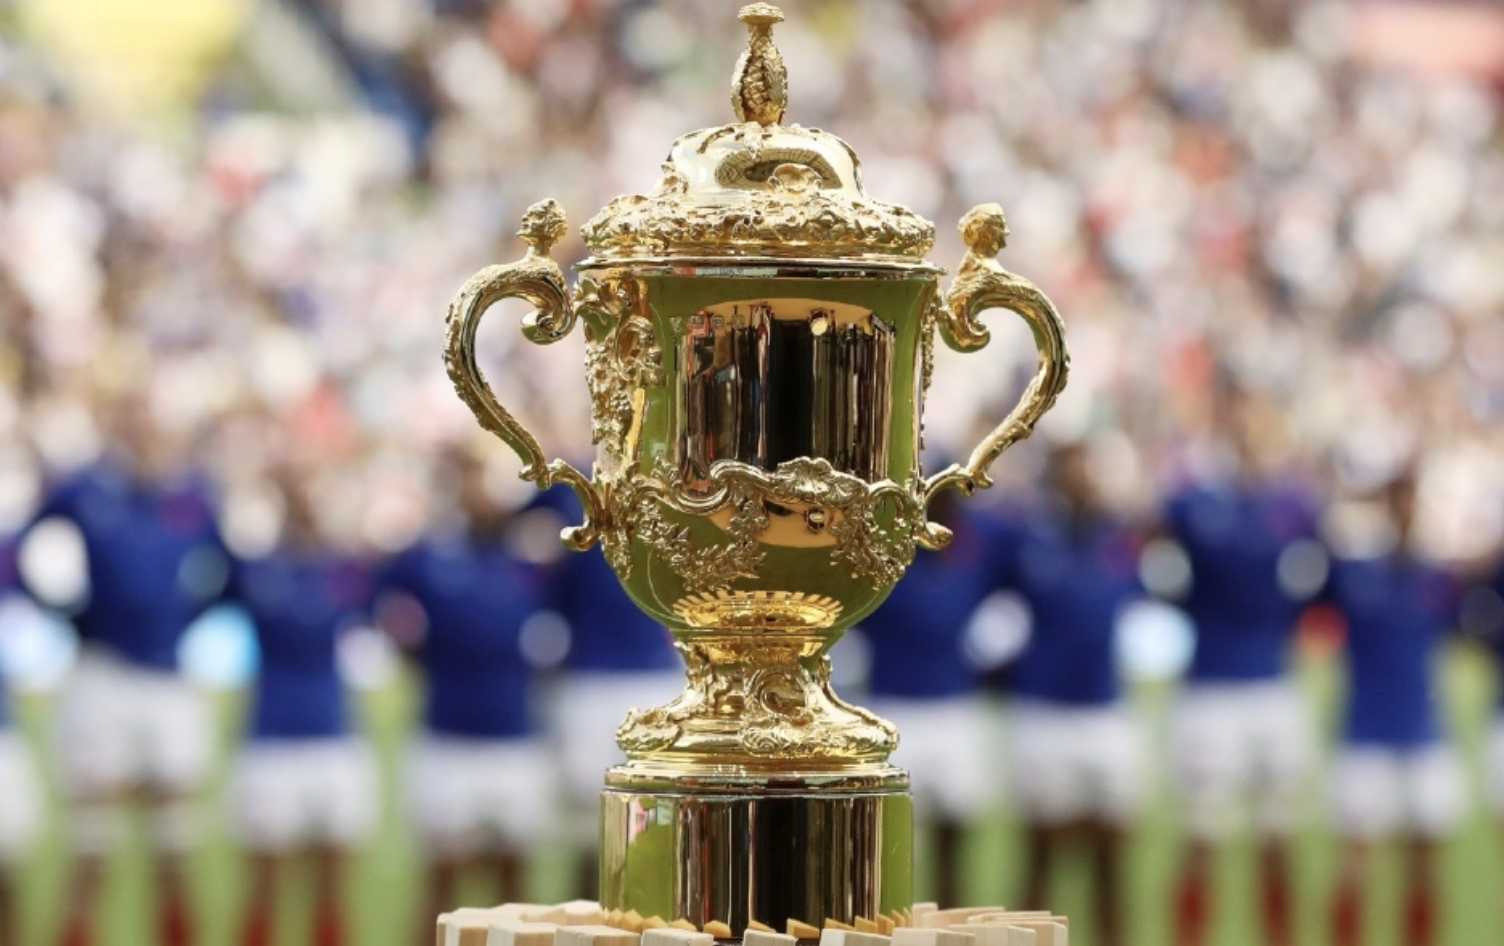 Rugby World Cup 